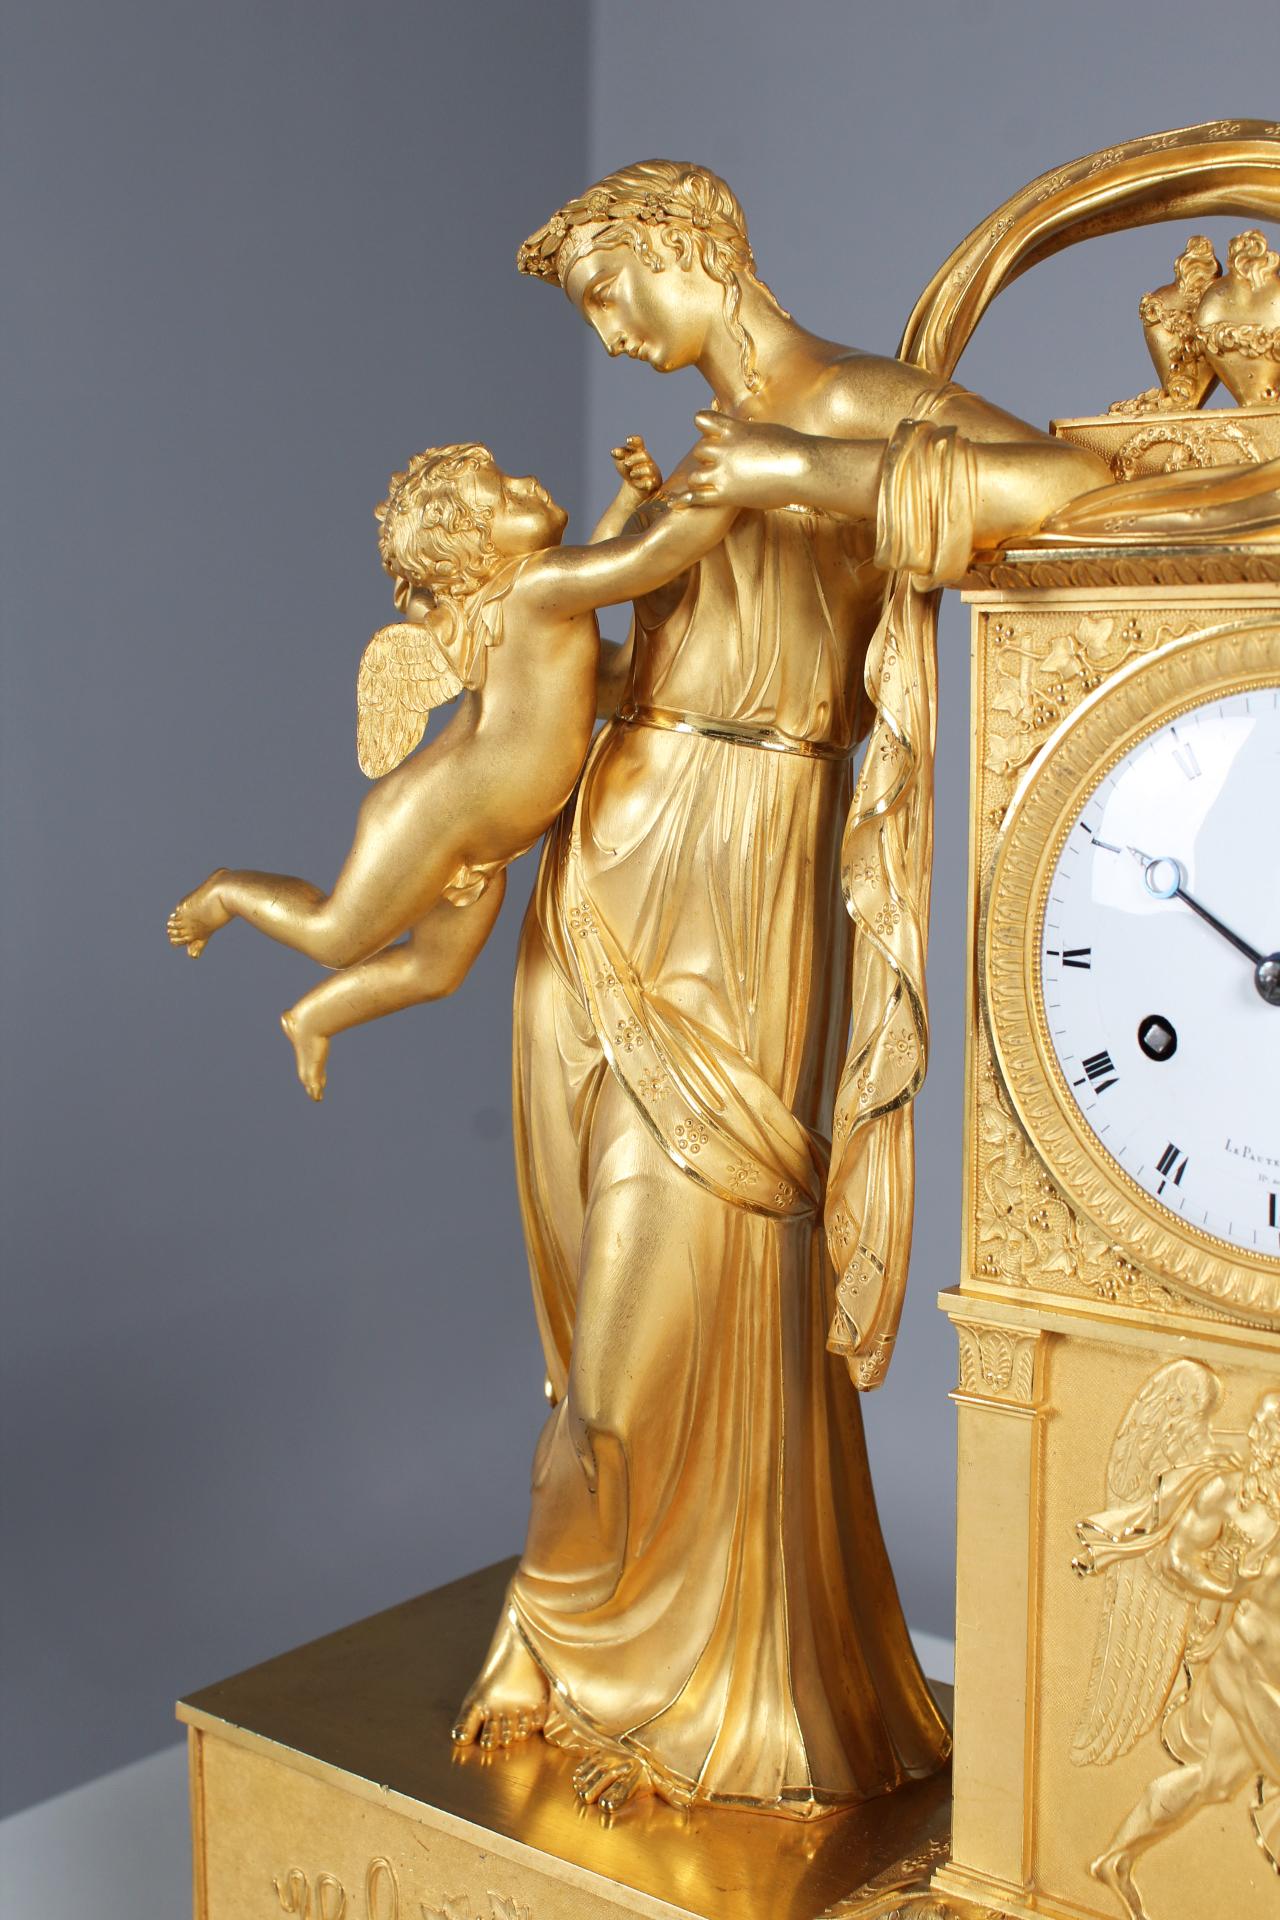 Ormulu pendule with depiction of friendship and love

Paris (Lepaute, Thomire)
fire-gilt bronze
Empire around 1815

Dimensions: H x W x D: 44 x 36 x 13 cm

French pendulum movement with eight days duration. Thread suspension and lock disc